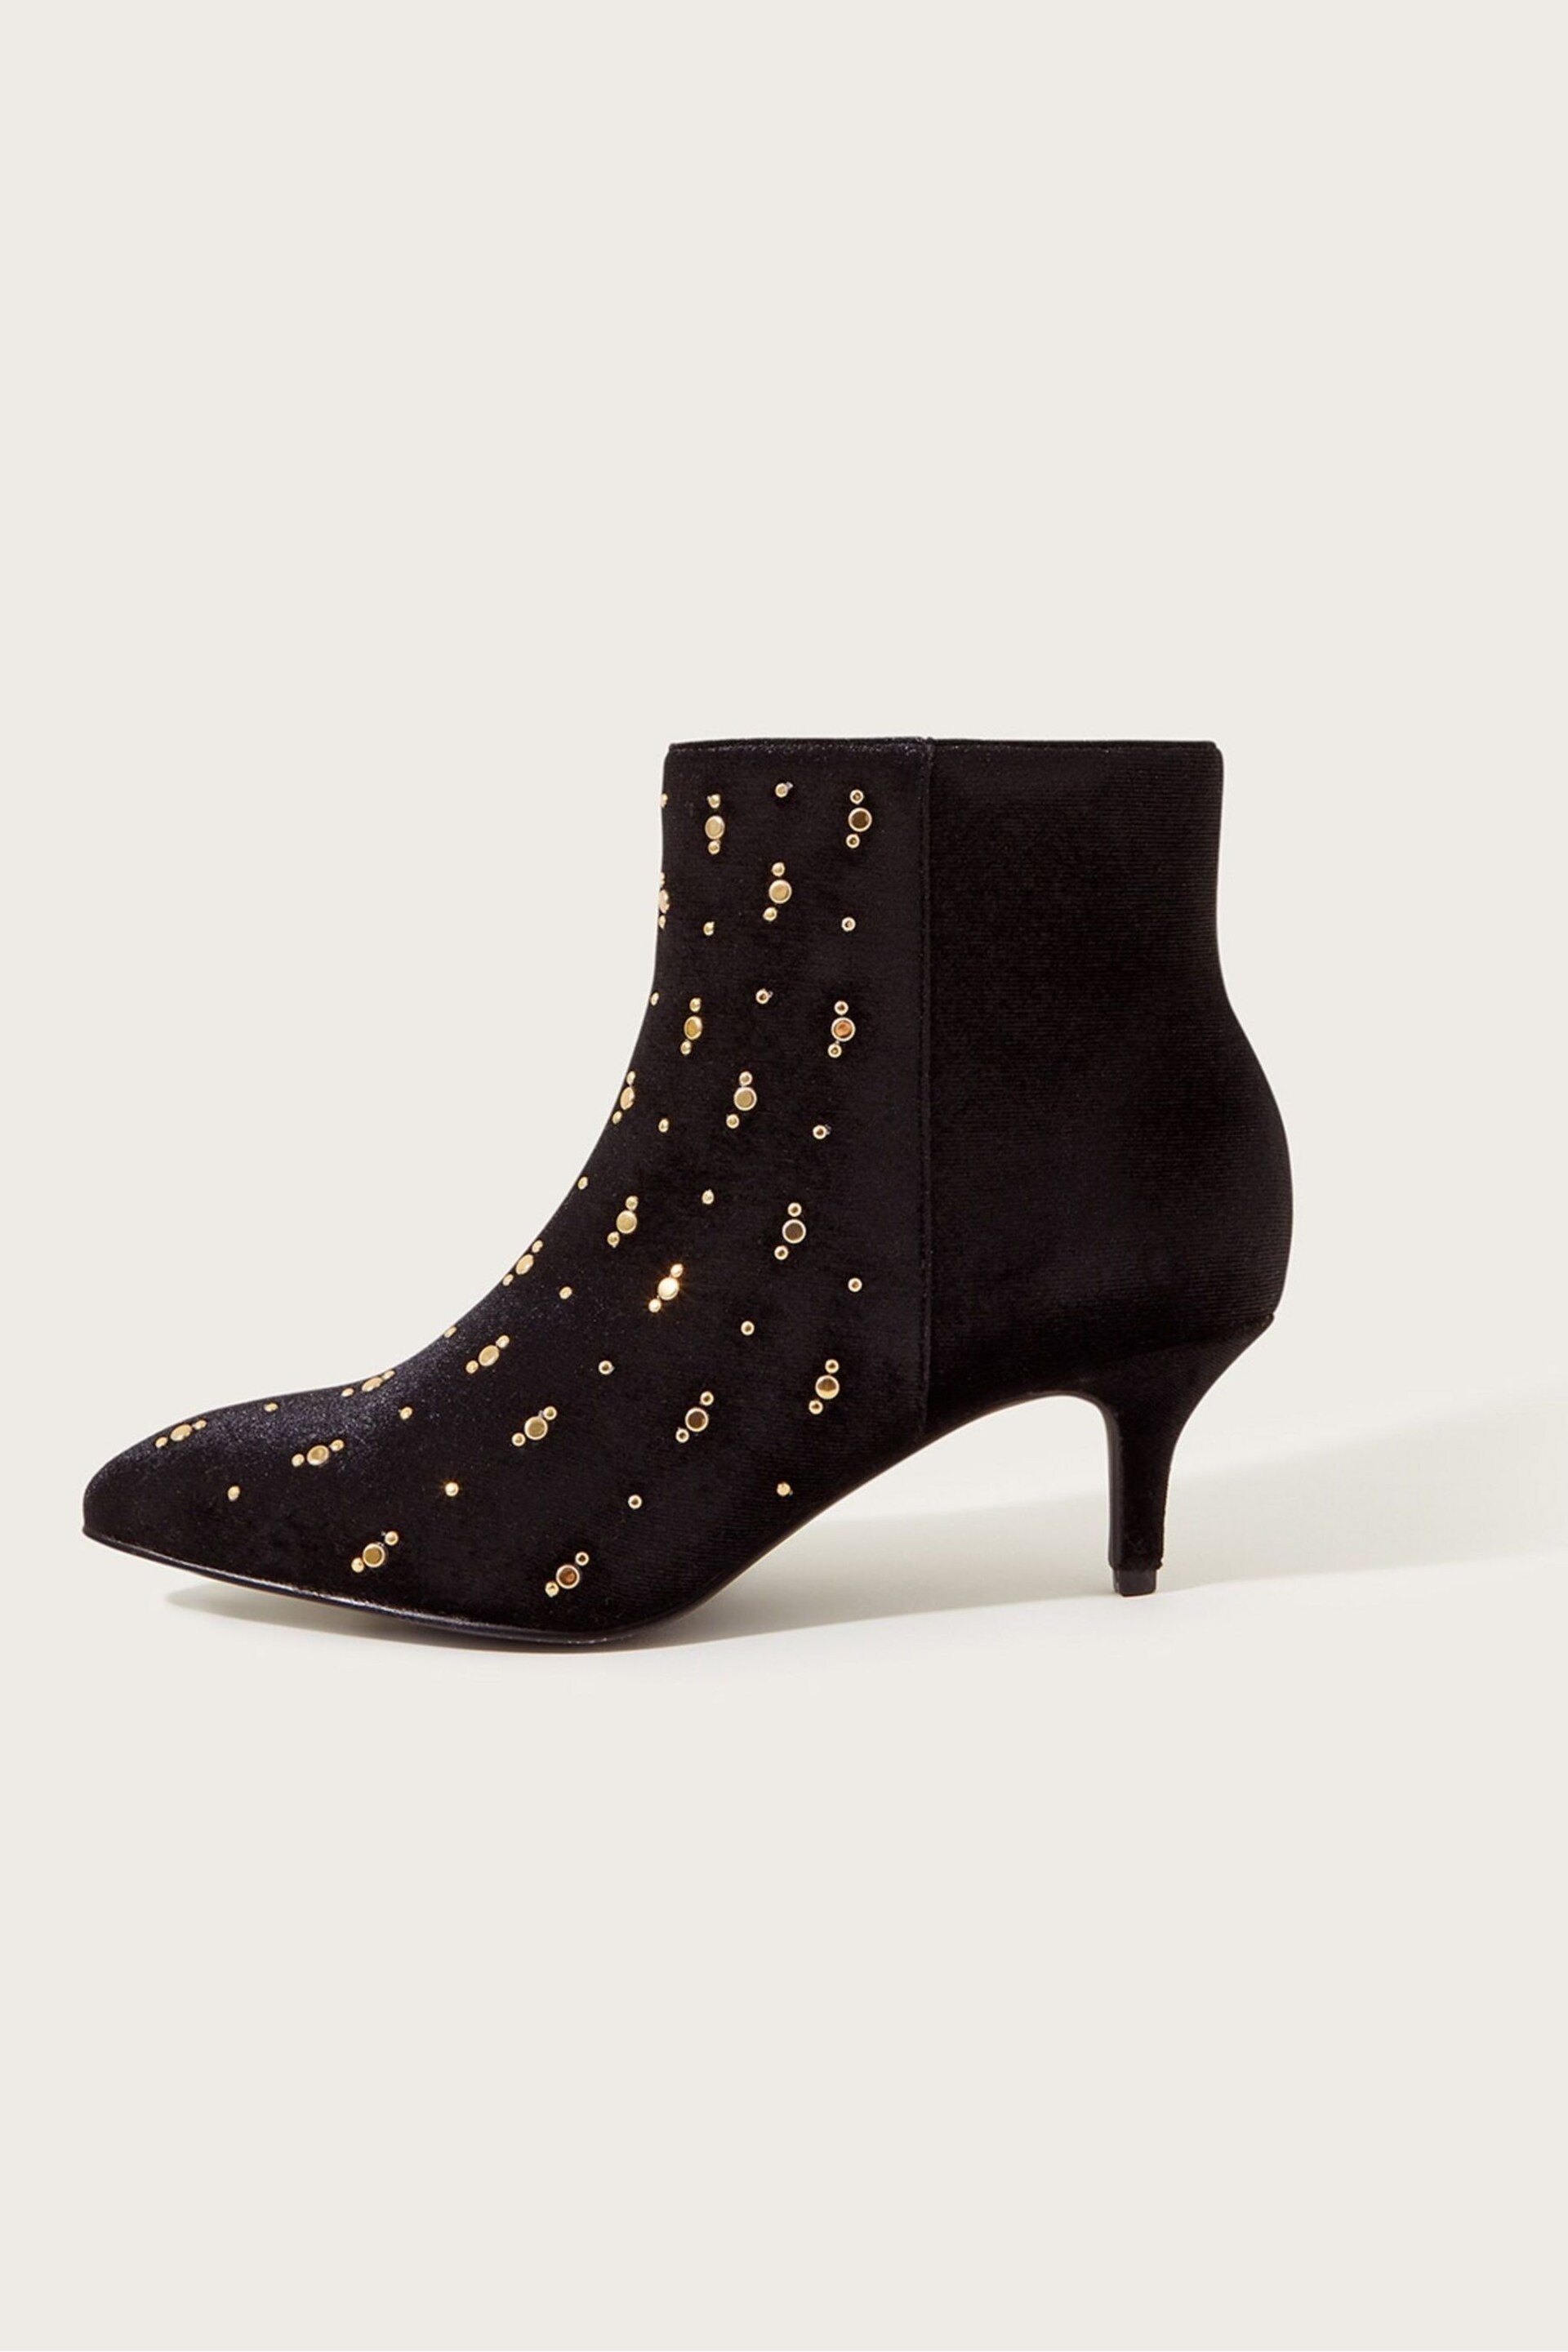 Monsoon Black Stud Ankle Boots - Image 3 of 3